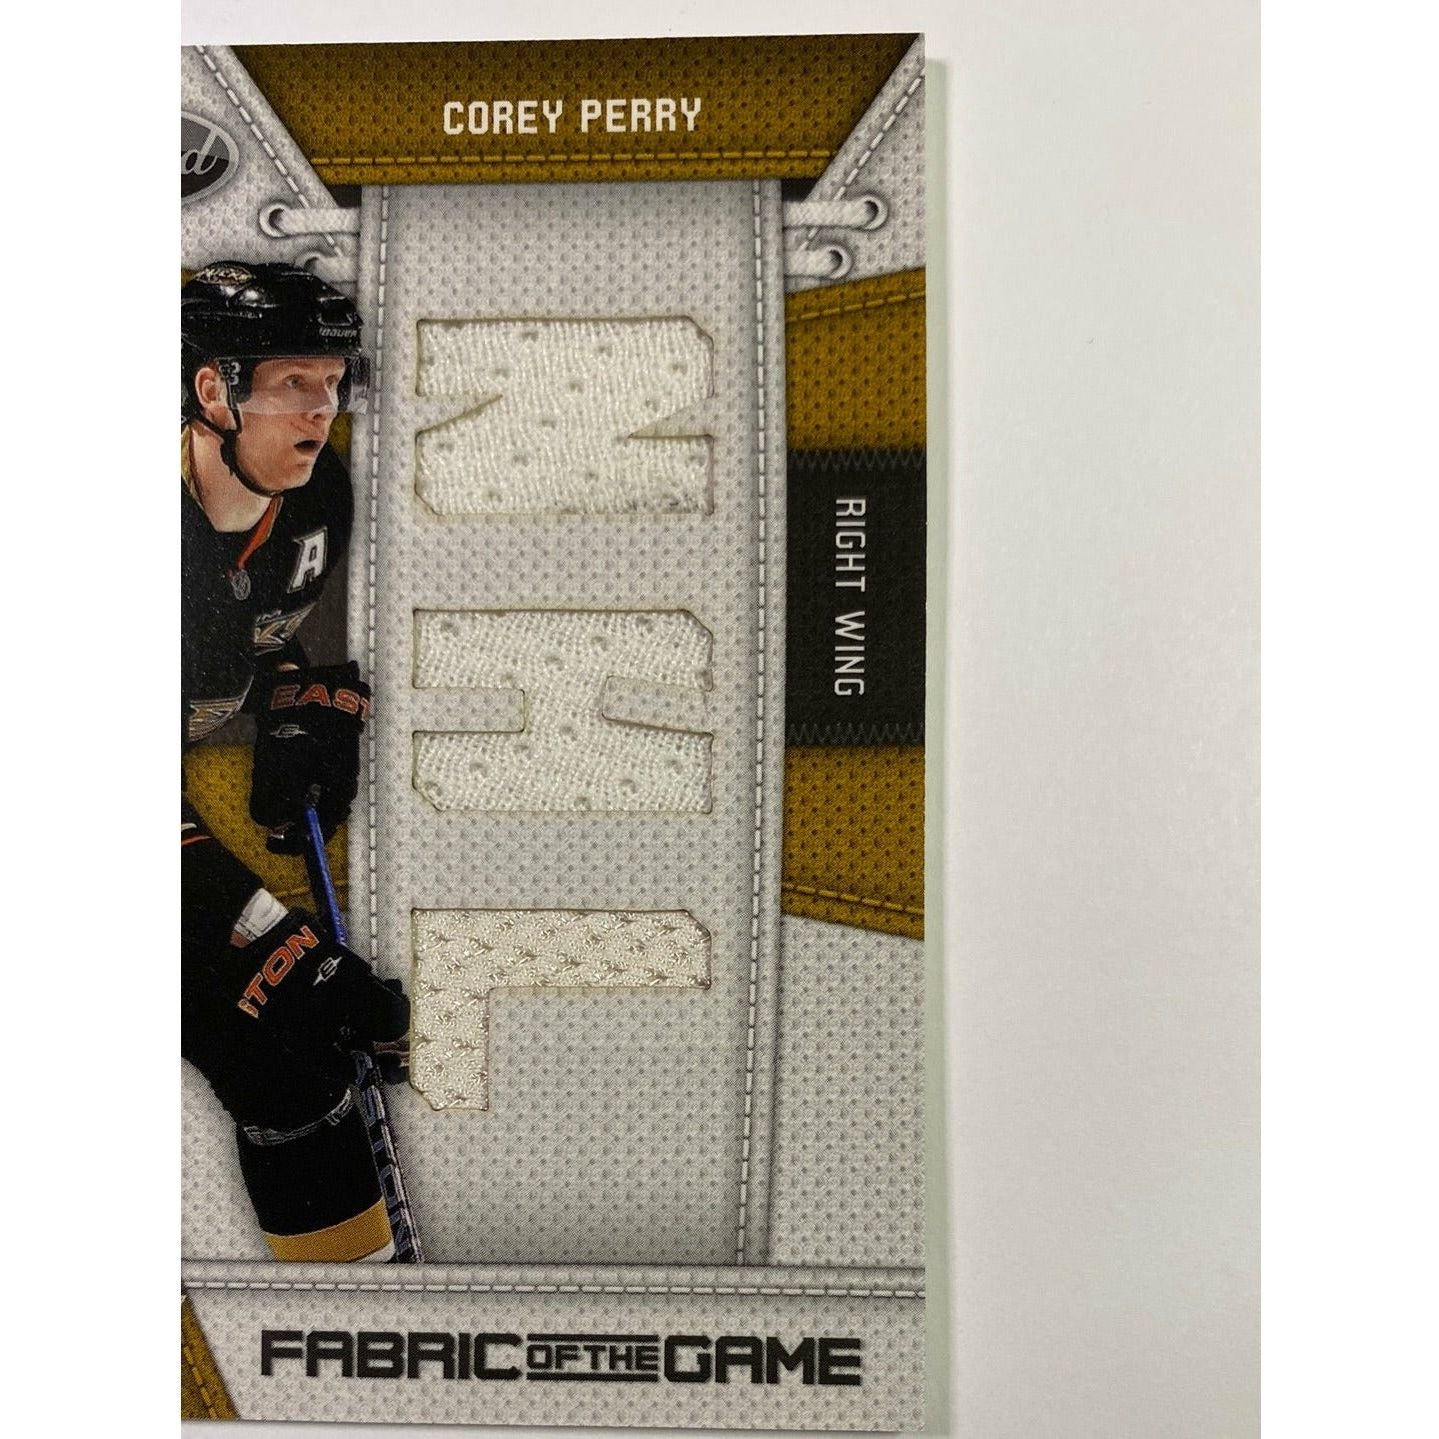  2010-11 Panini Certified Corey Perry Fabric of the Game “NHL” Patch /25  Local Legends Cards & Collectibles